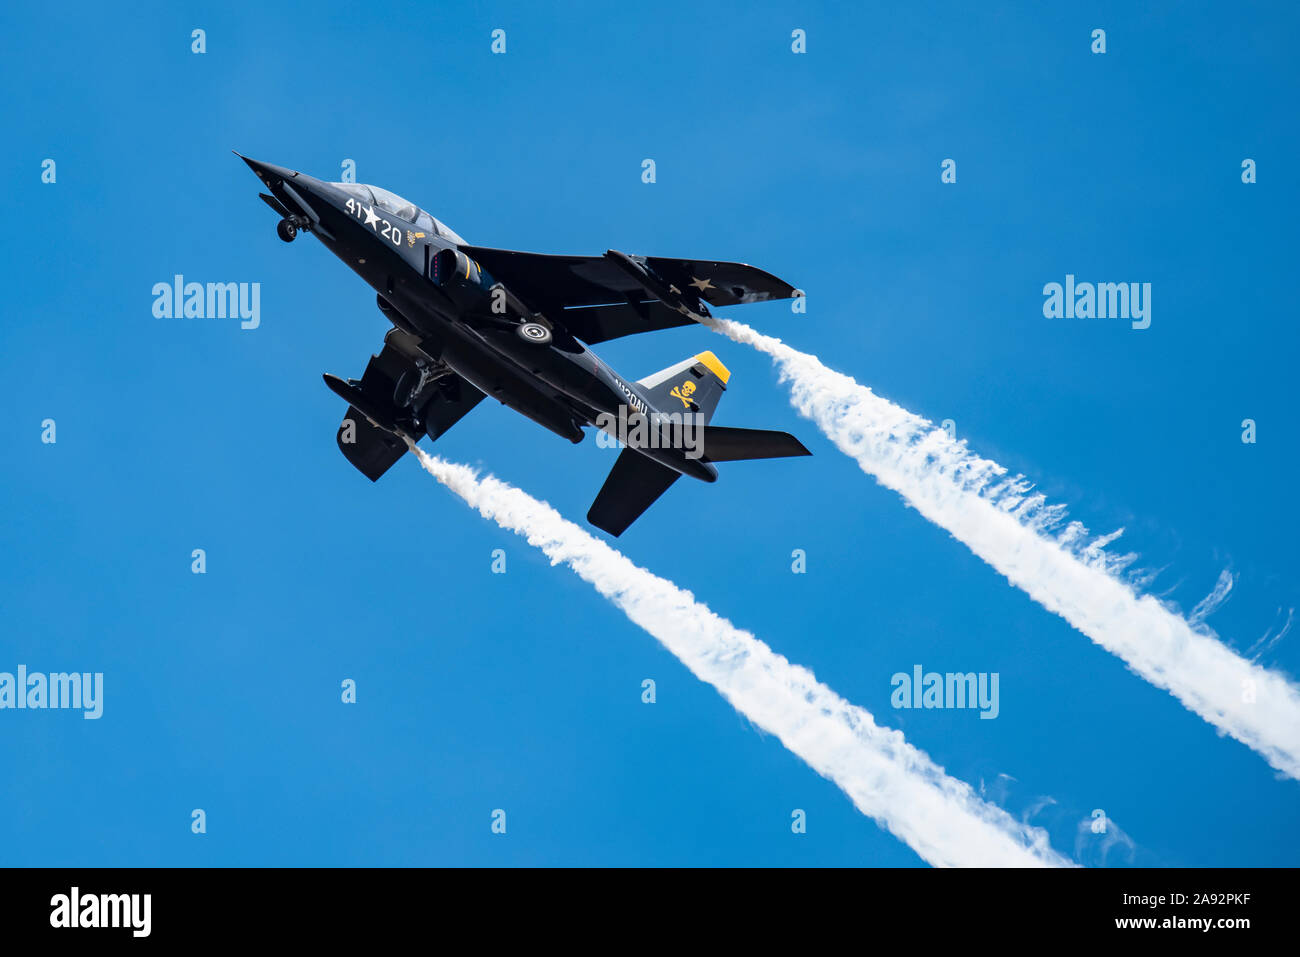 The 1981 DORNIER GMBH ALPHA-JET trailing smoke while performing aerobatic manoeuvres with landing gear down in the 2019 Olympic Air Show, Olympic A... Stock Photo